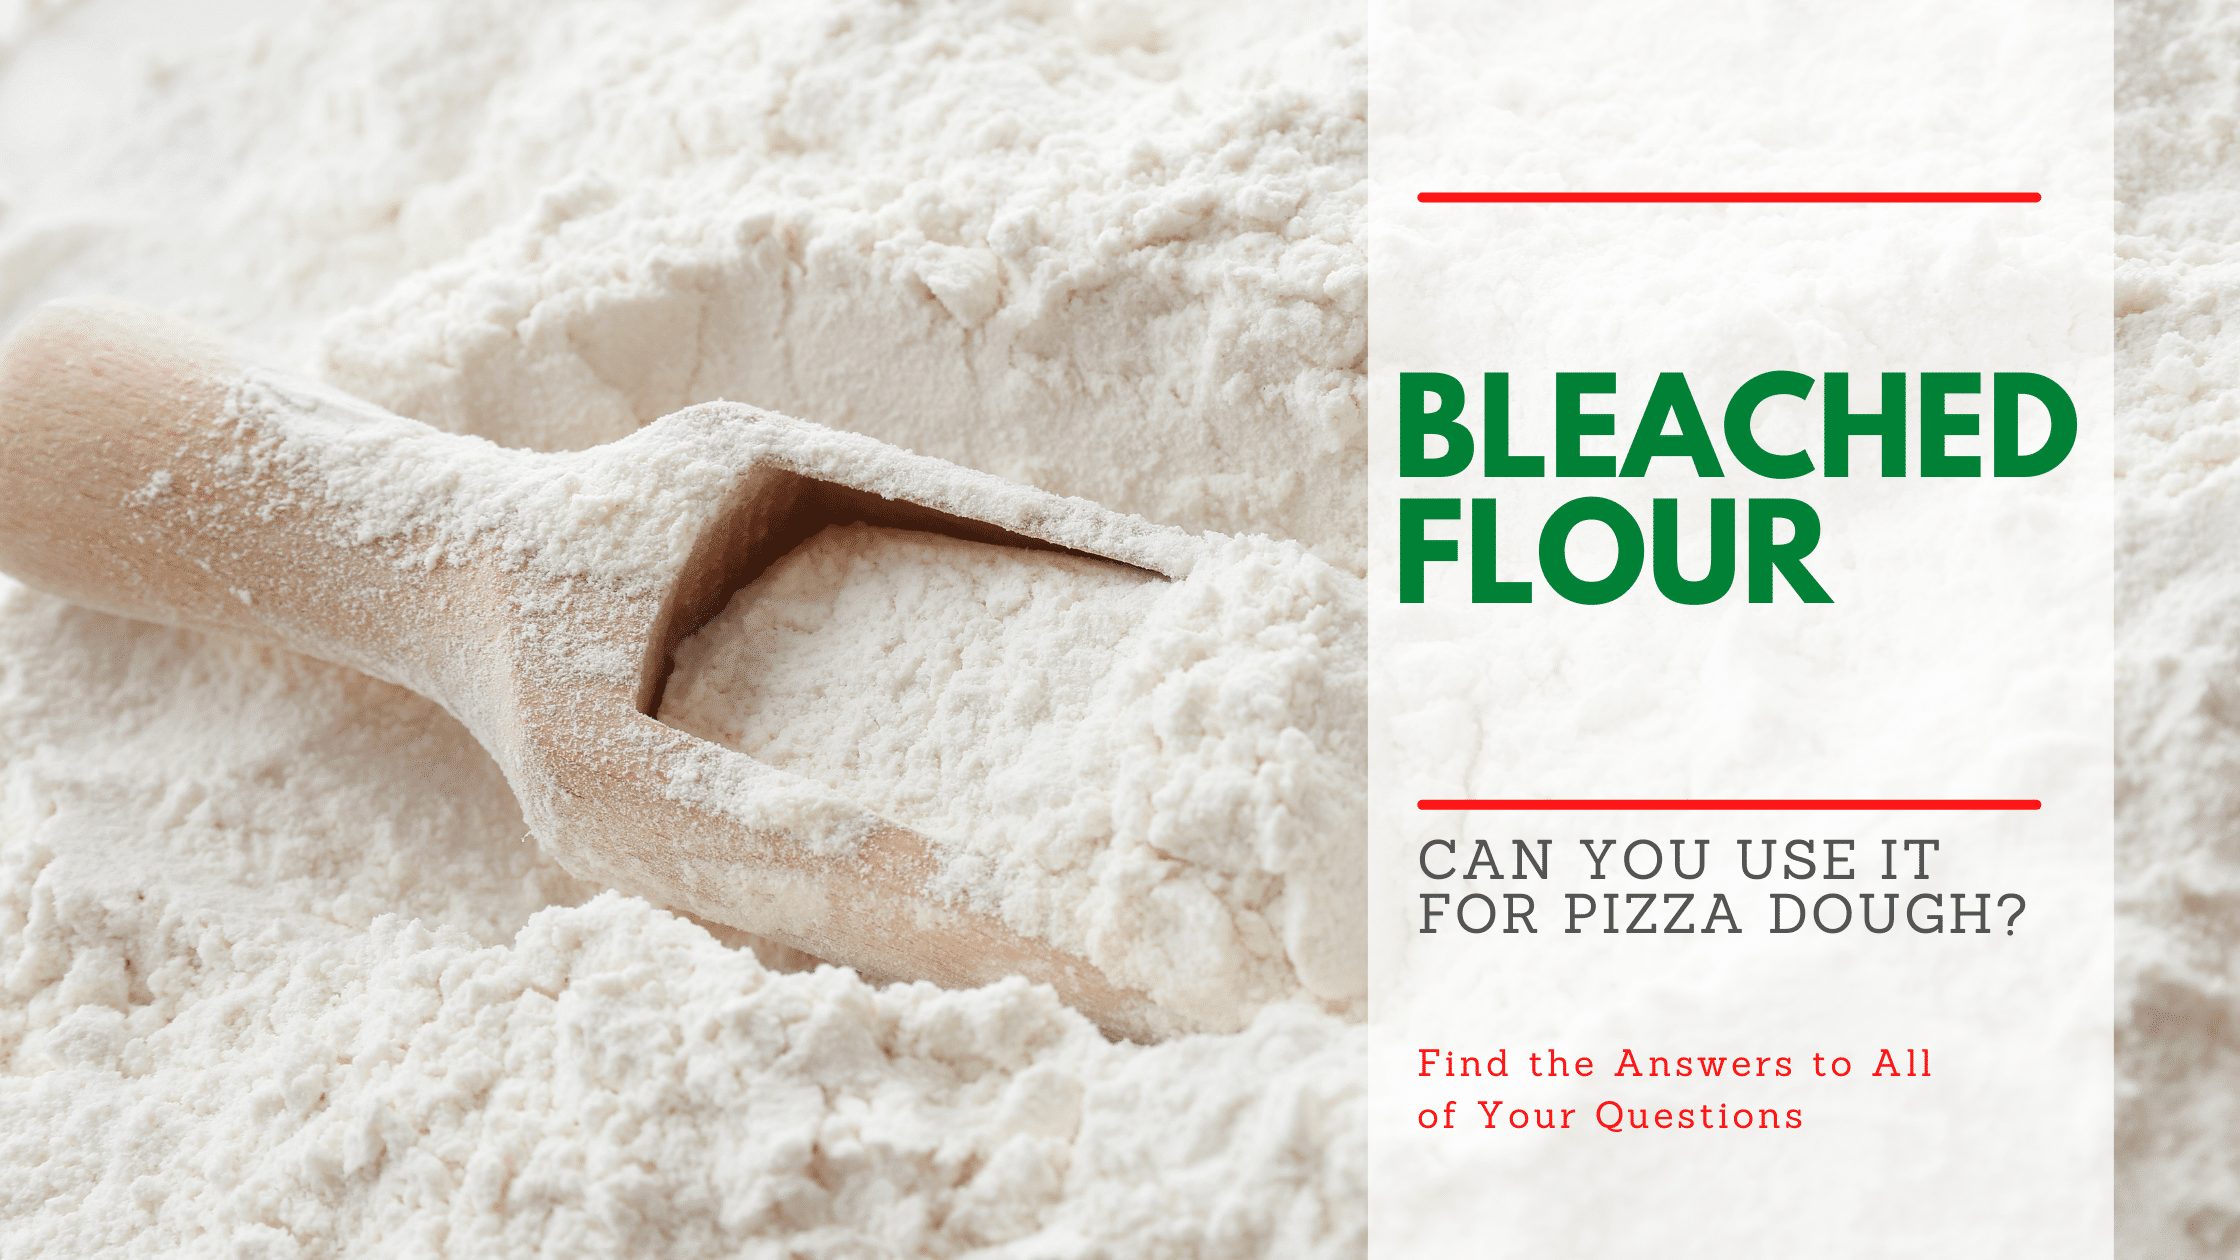 Can you use bleached flour for pizza dough